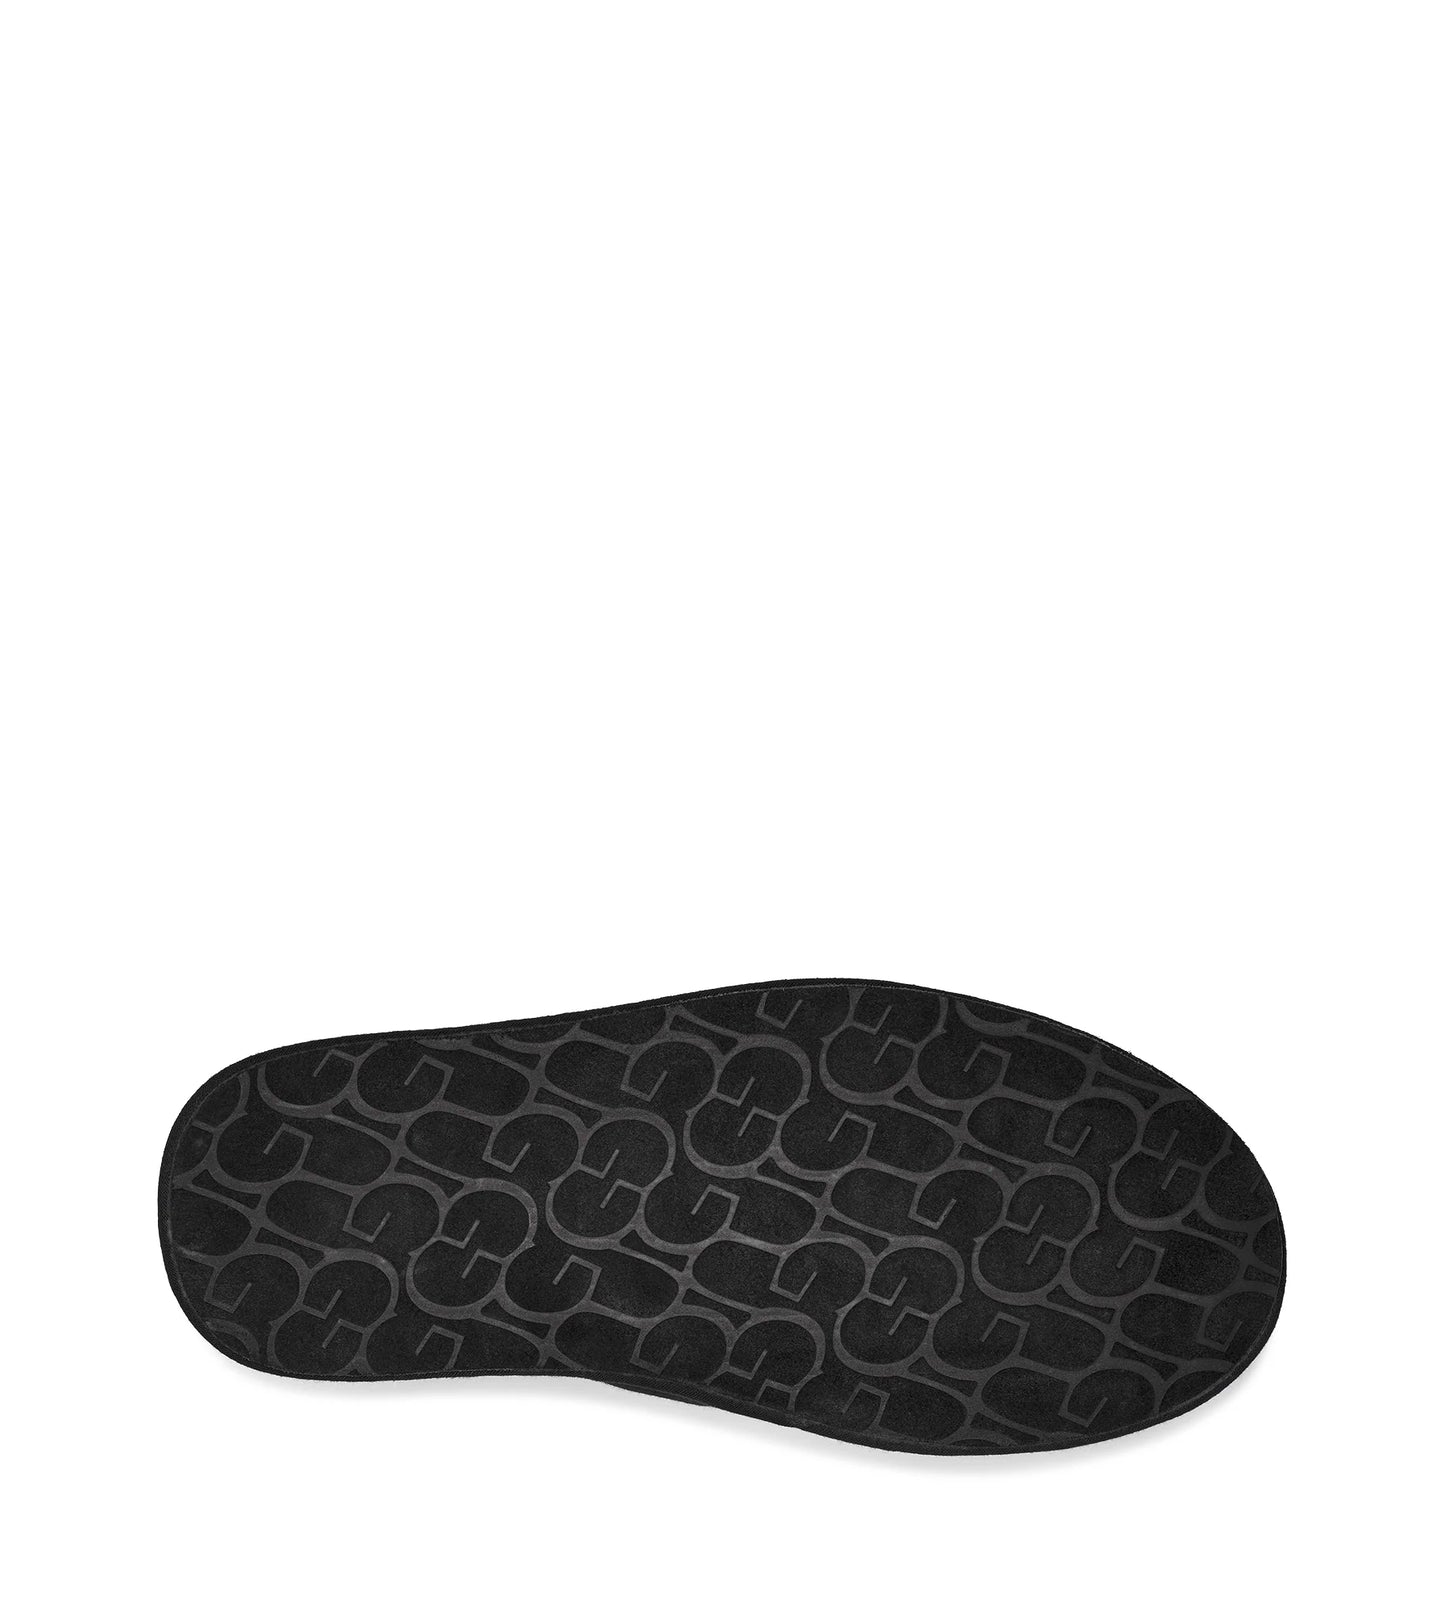 UGG Men's Scuff Logo Graphic Band Slippers style #1123737